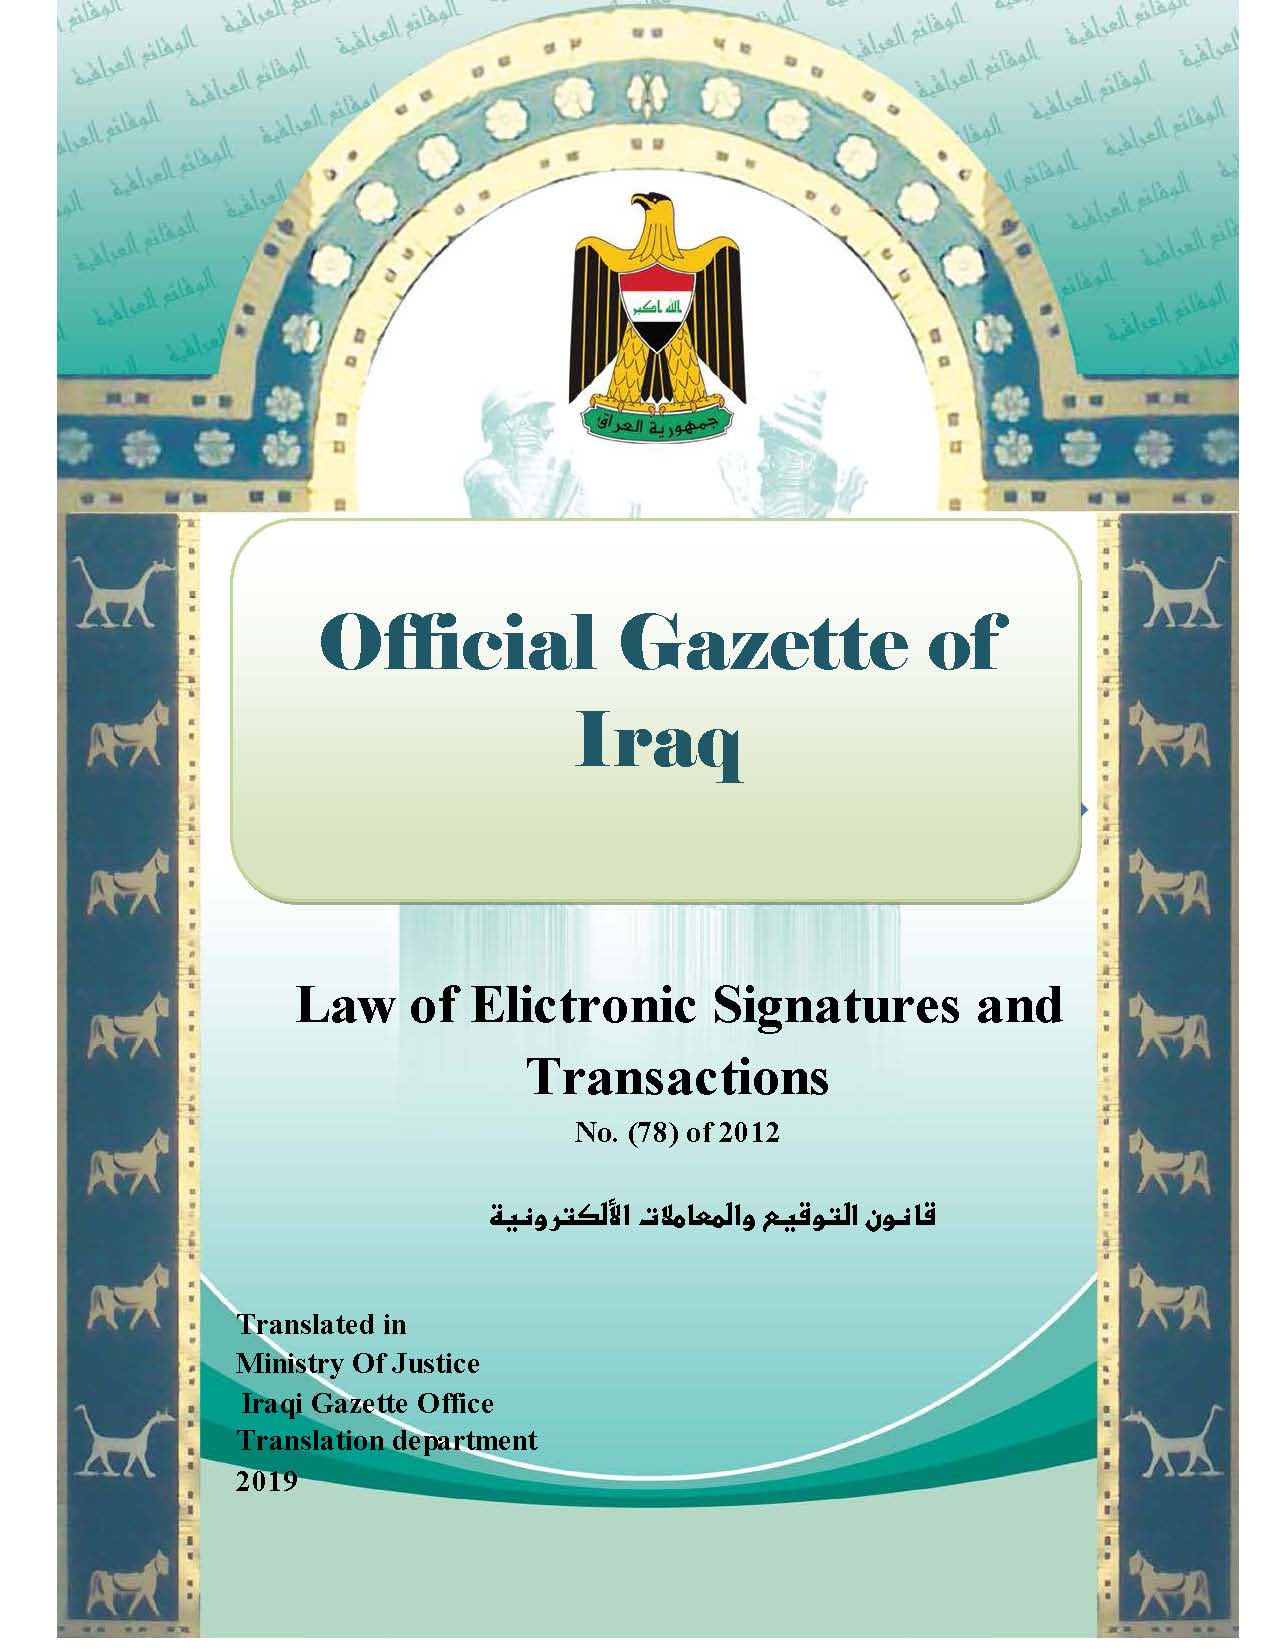 Law of Elictronic Signatures and Transactions 